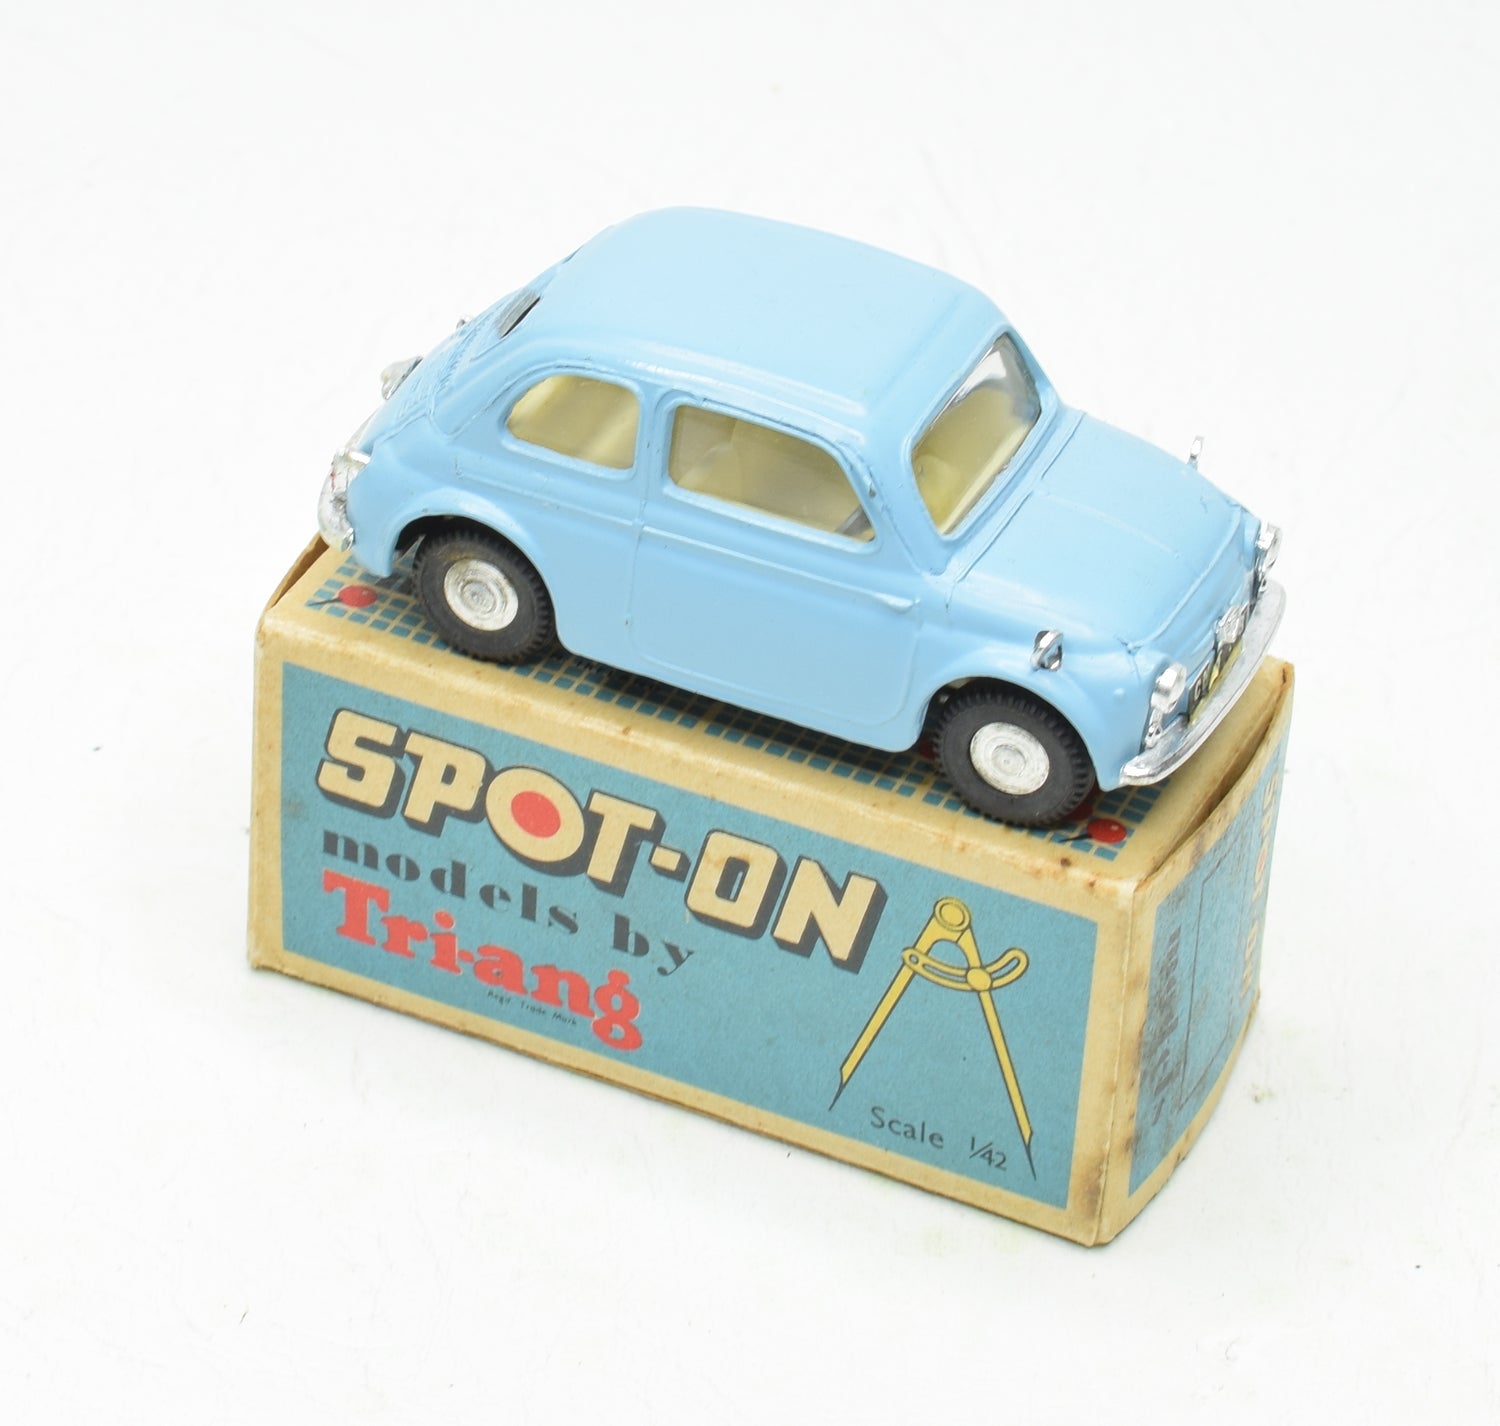 Spot-on 185 Fiat 500 Virtually Mint/Boxed M.T.B Collection